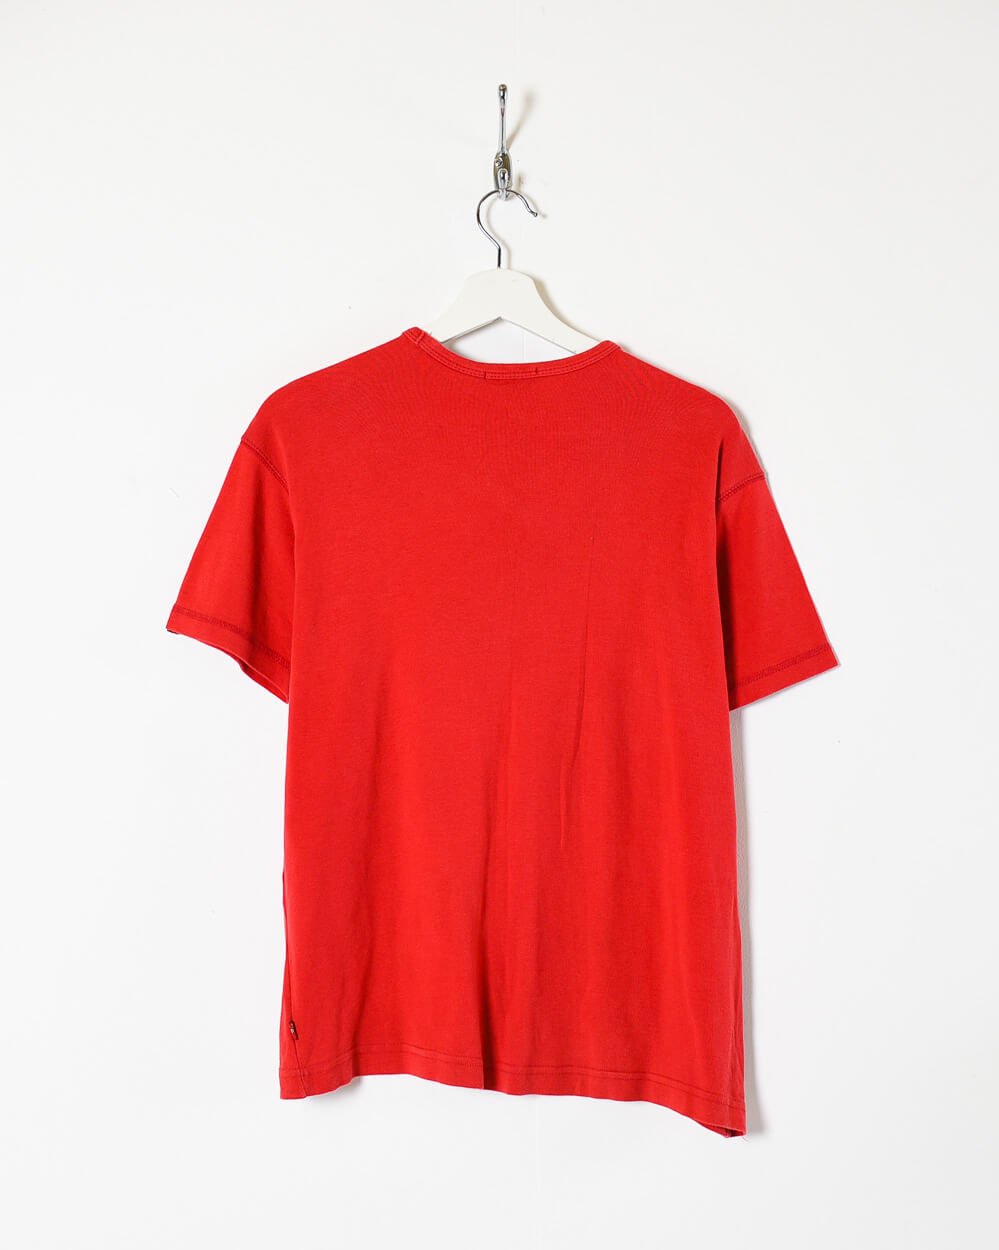 Red Levi's Women's T-Shirt - Large 